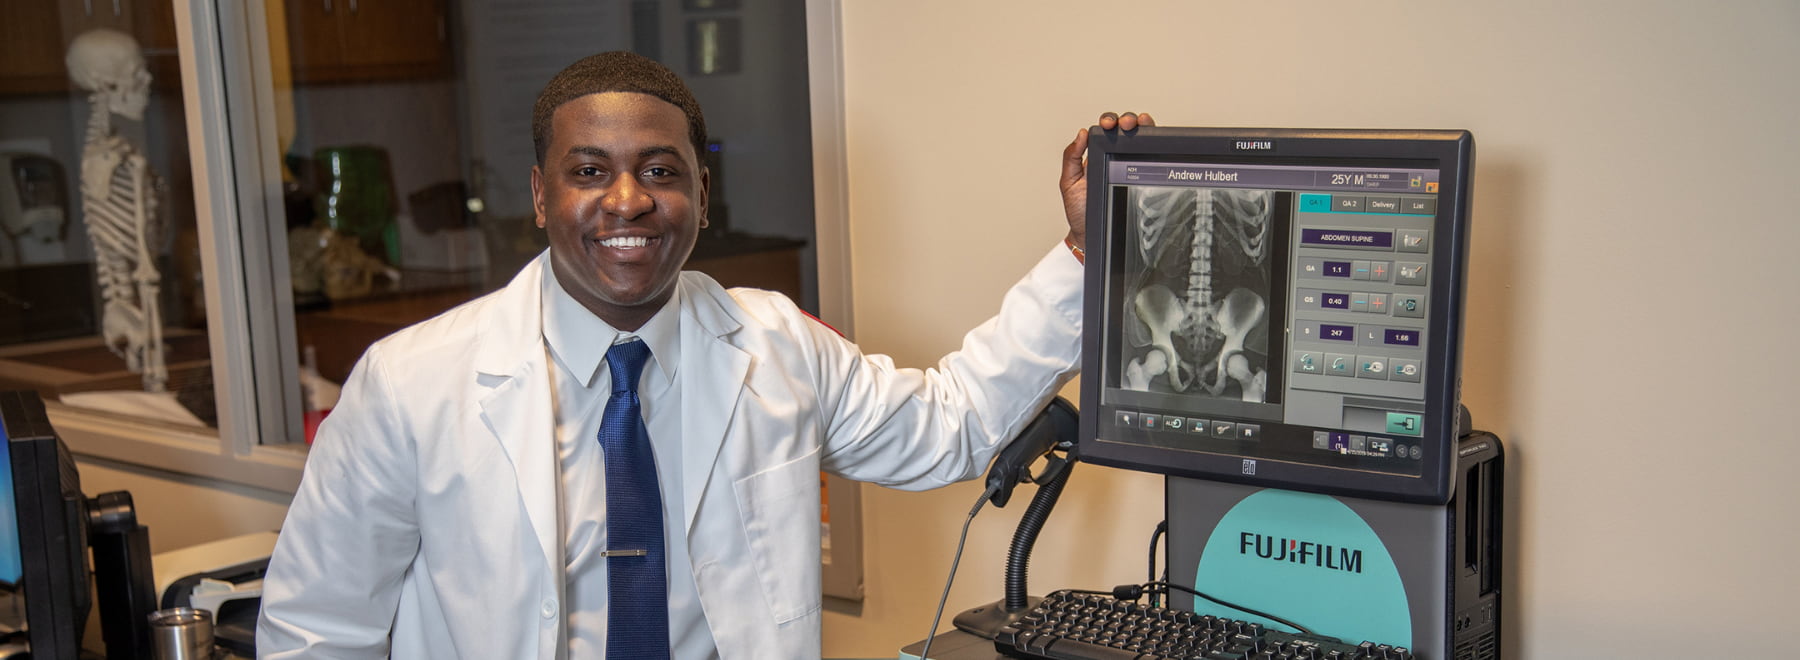 Male radiologic sciences student poses in front of equipment.